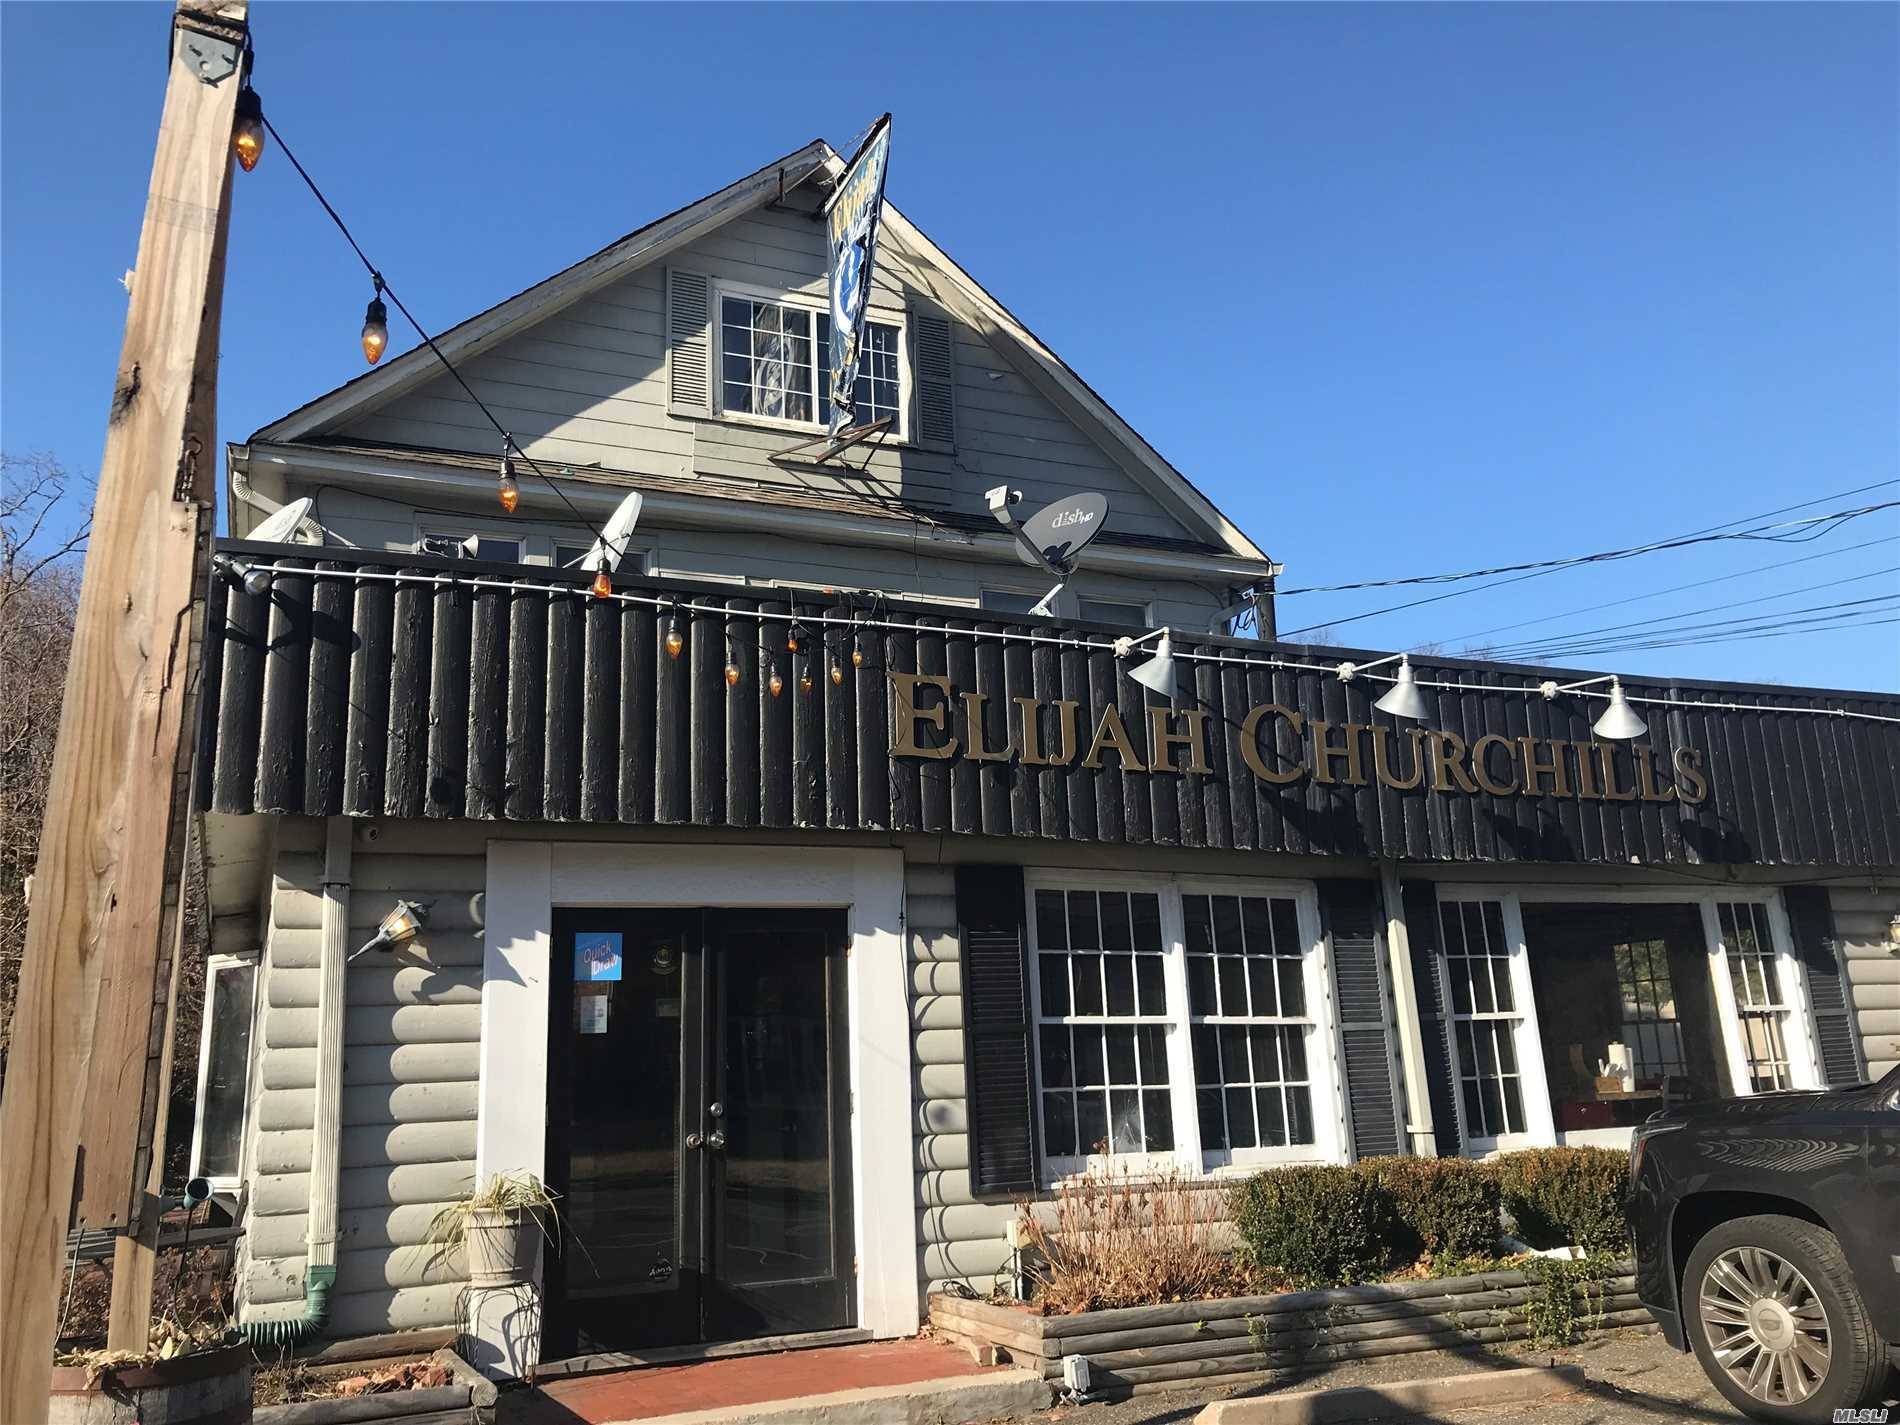 Fantastic Opportunity To Revitalize A Neighborhood Restaurant With Loyal Following In Business For 17 Years, Also Has Income Producing Room Rentals On Second Floor.